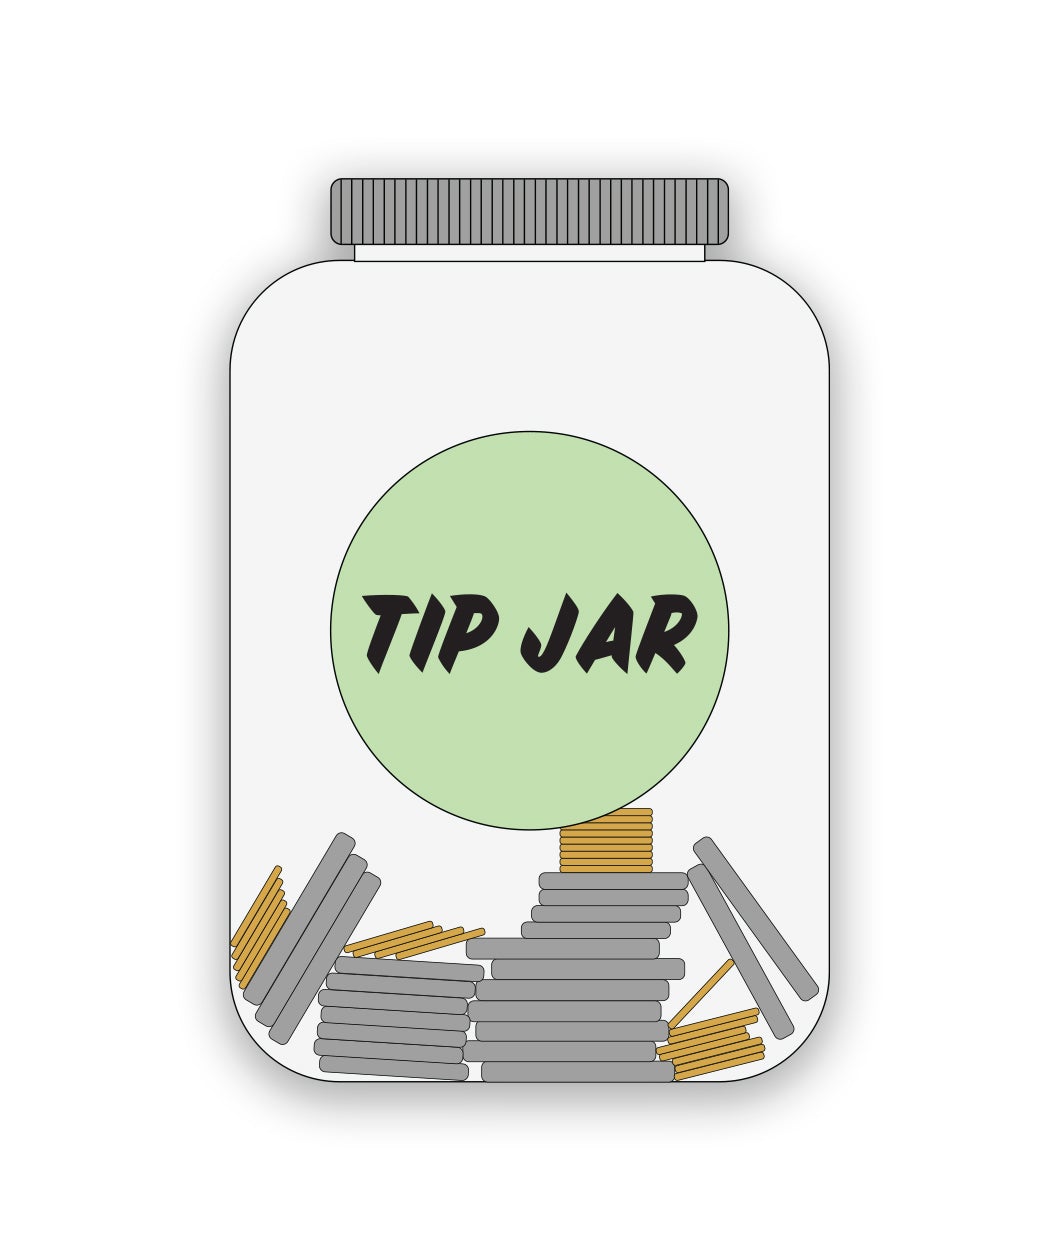 A drawing of a clear cylindrical jar with coins inside of it and a mint green circle on it labeled "Tip Jar" - by Black Girls Create